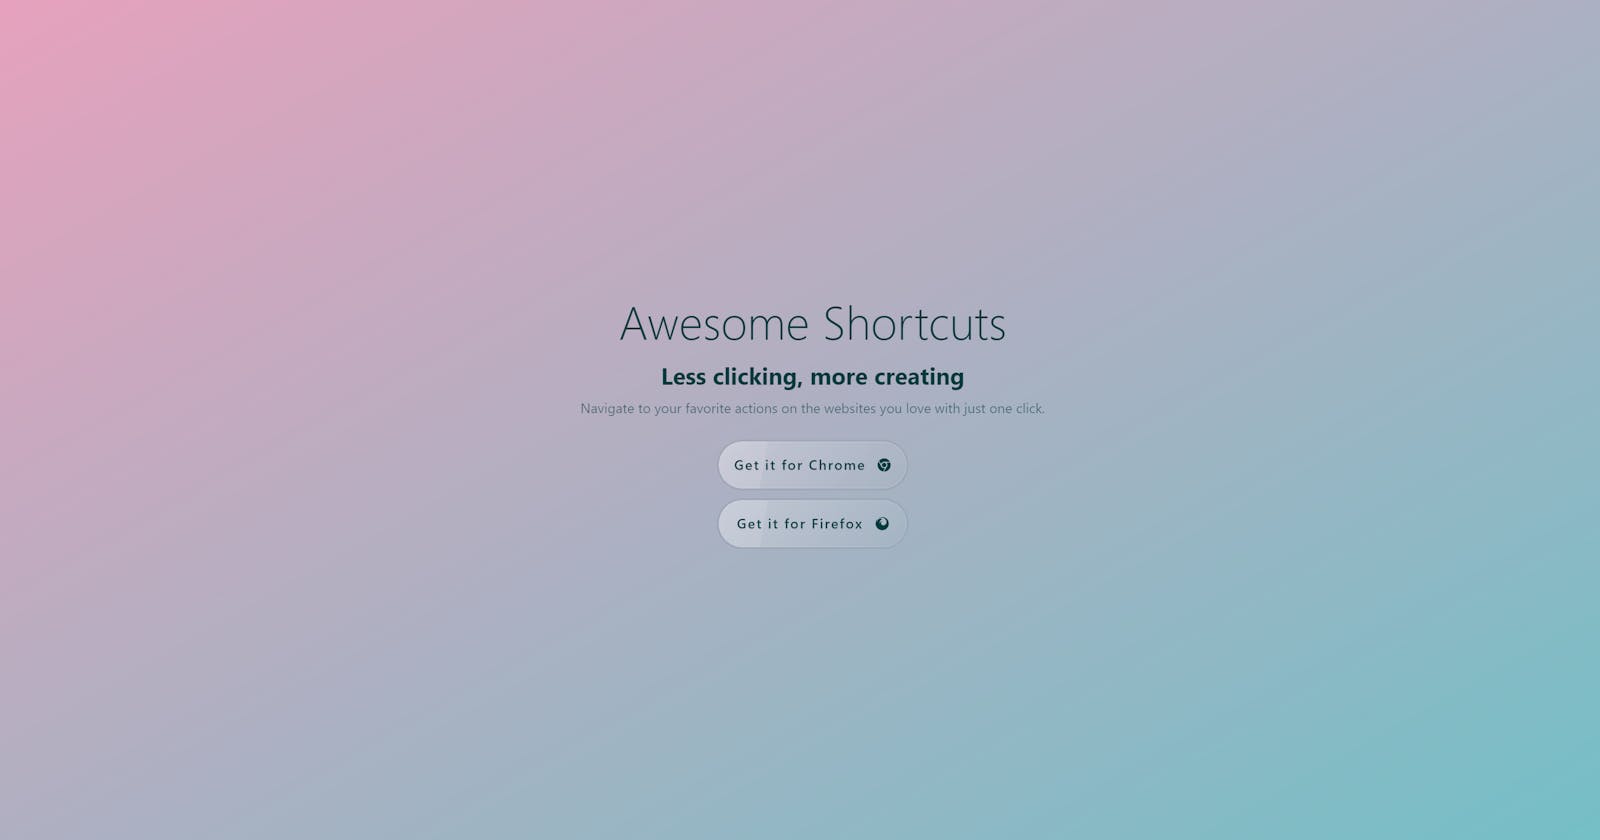 Awesome Shortcuts: navigate to your favorite actions on the websites you love with just one click